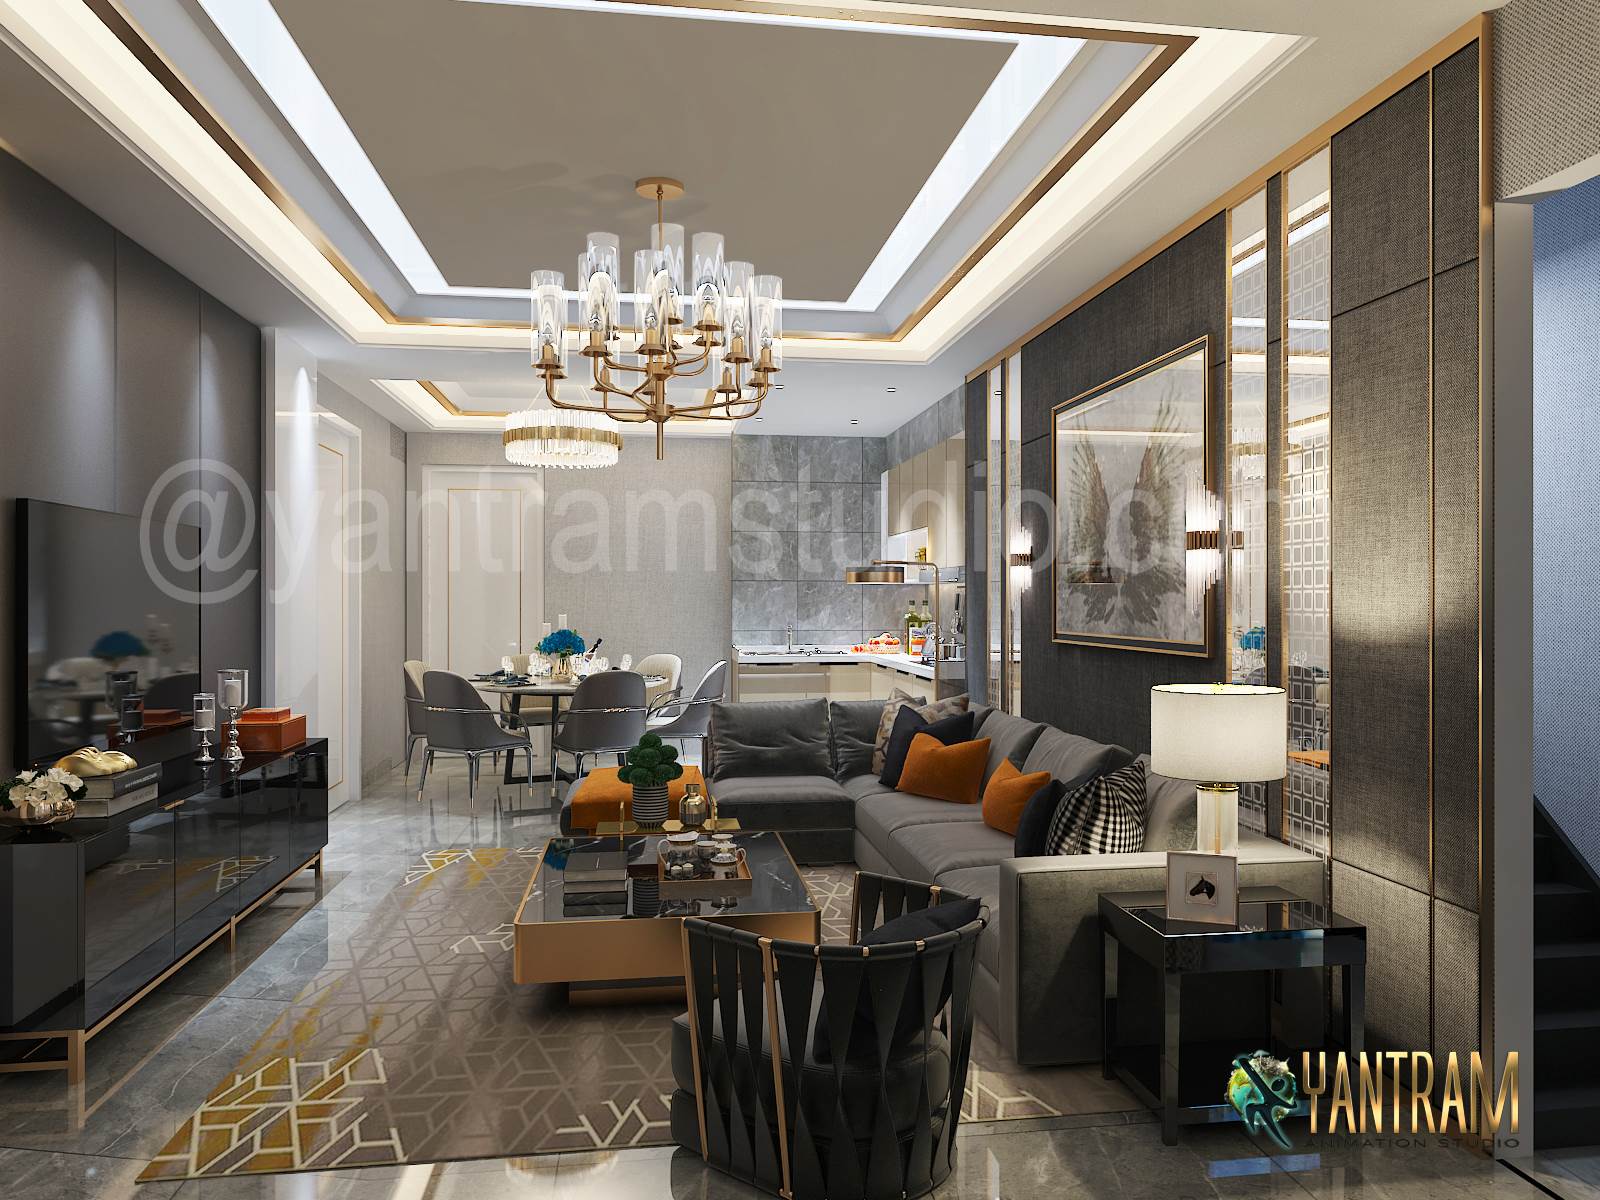 3d-architectural-animation-services-for-two-story-condo-Livingroom-in-san-diego.jpg - 3D architectural animation services are used more extensively in various projects. They are used to create a three-dimensional walk-through of a building or space. by Yantramarchitecturaldesignstudio